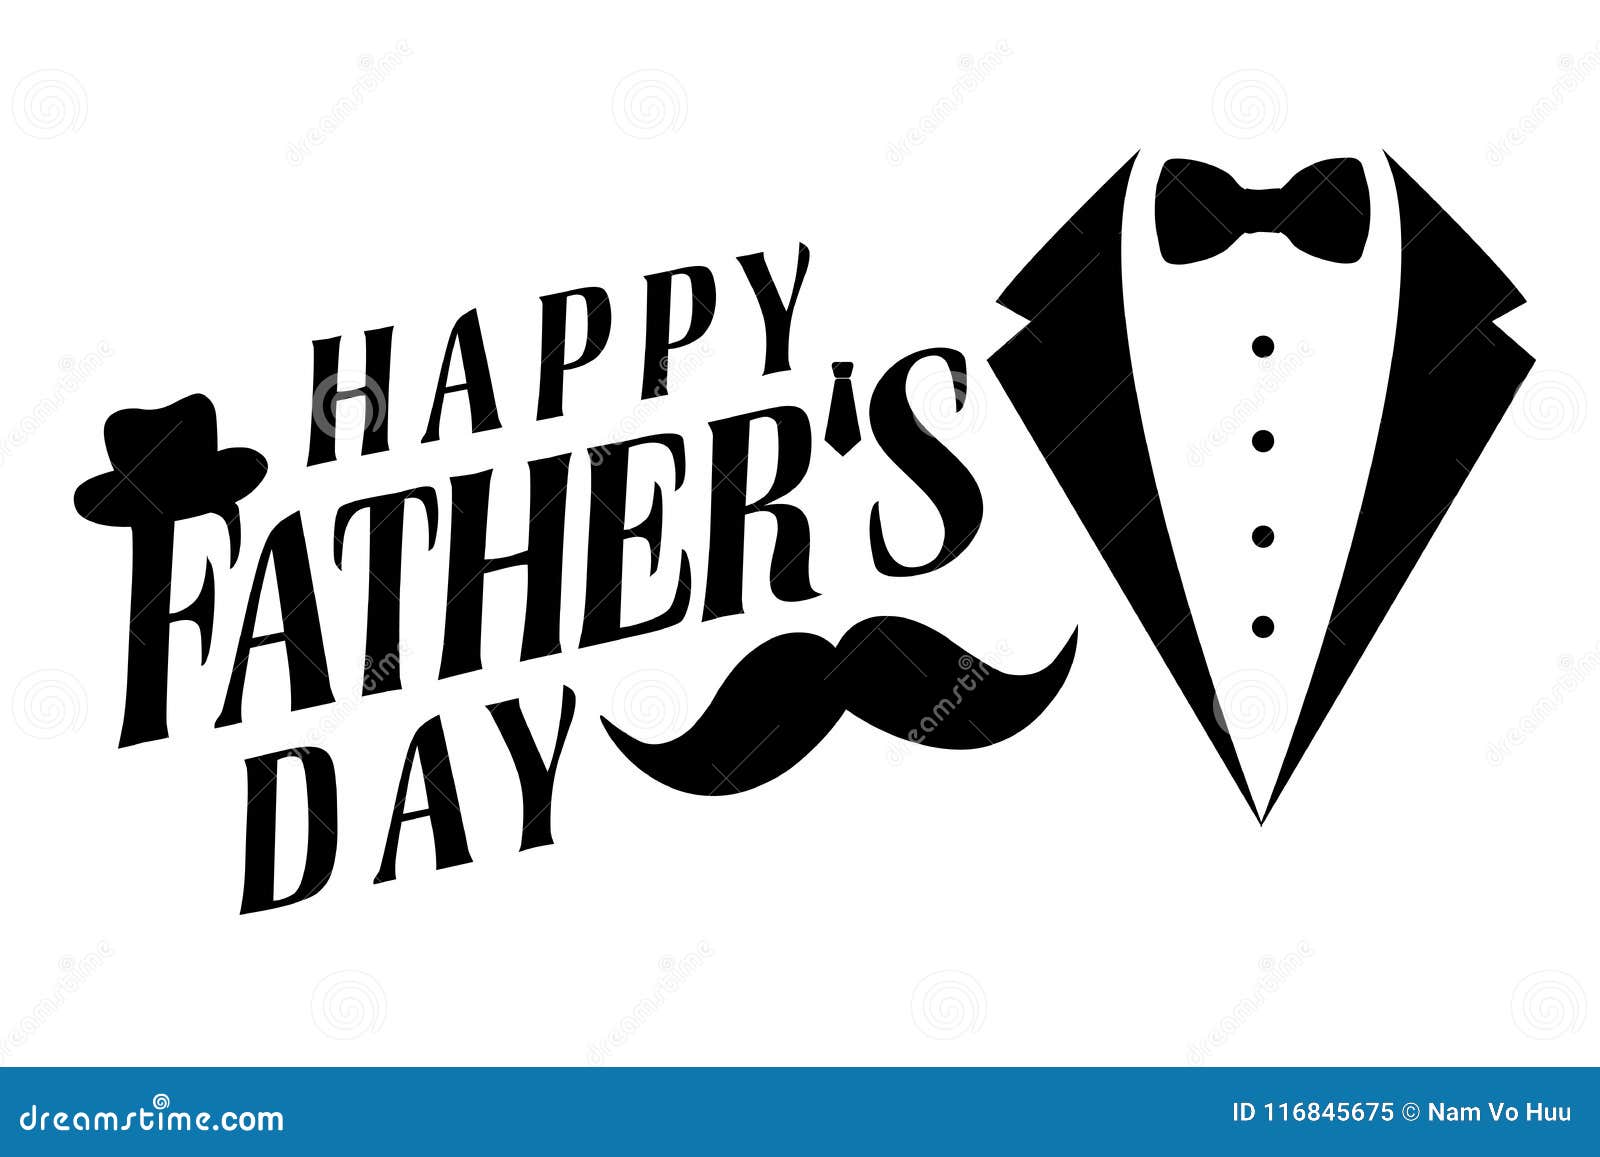 Happy Fathers Day Greeting Stock Vector Illustration Of Happy